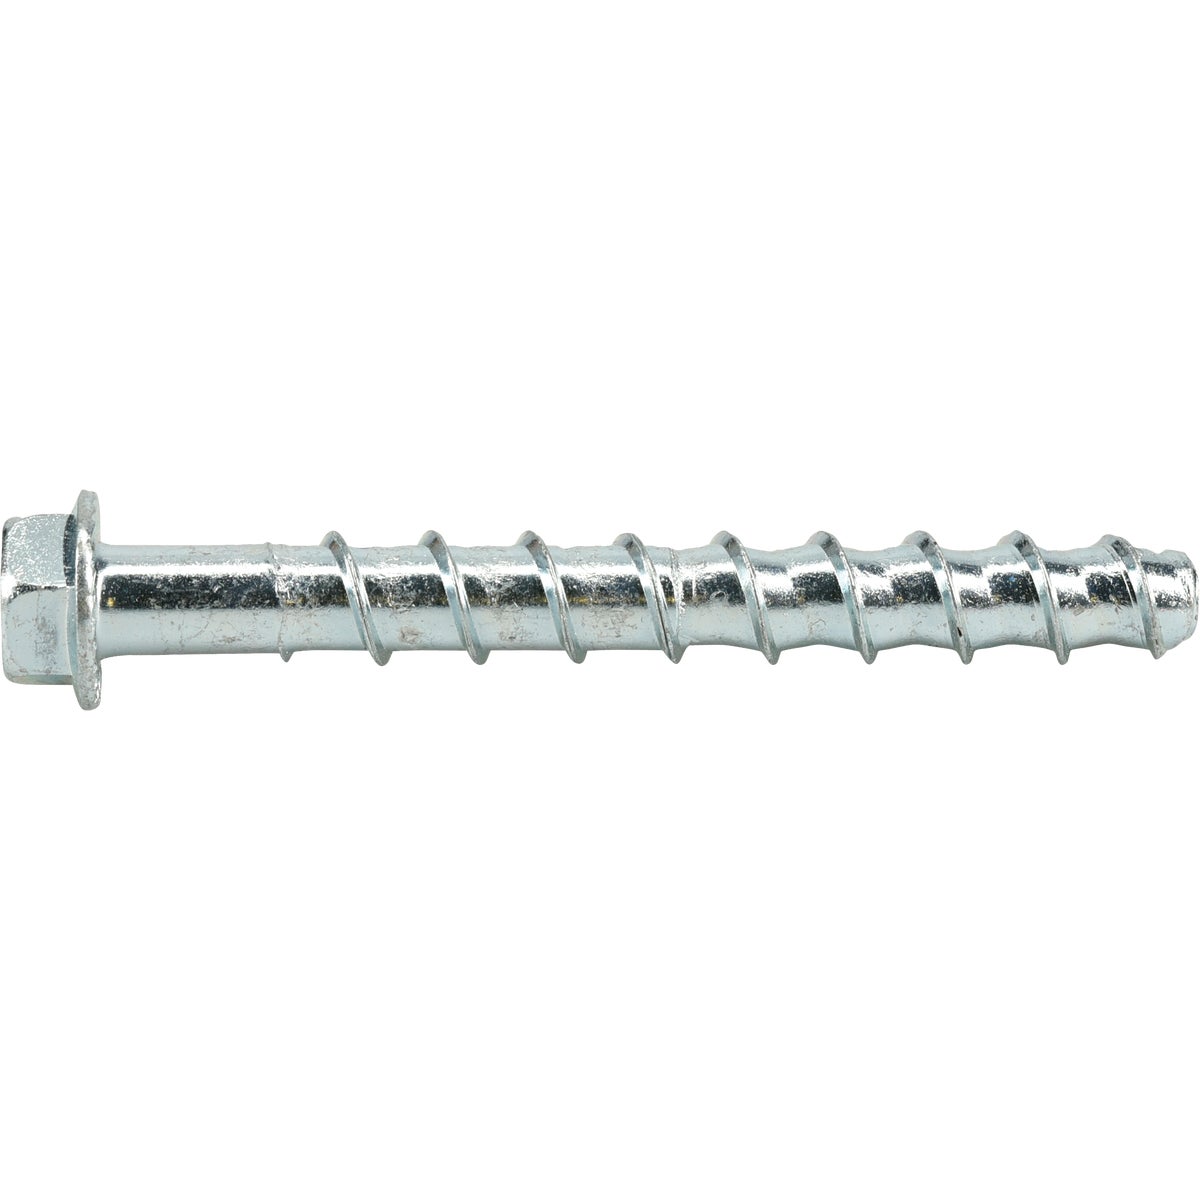 Hillman Screw-Bolt+ 5/8 In. x 5 In. Masonry and Concrete Anchor (5 Count)